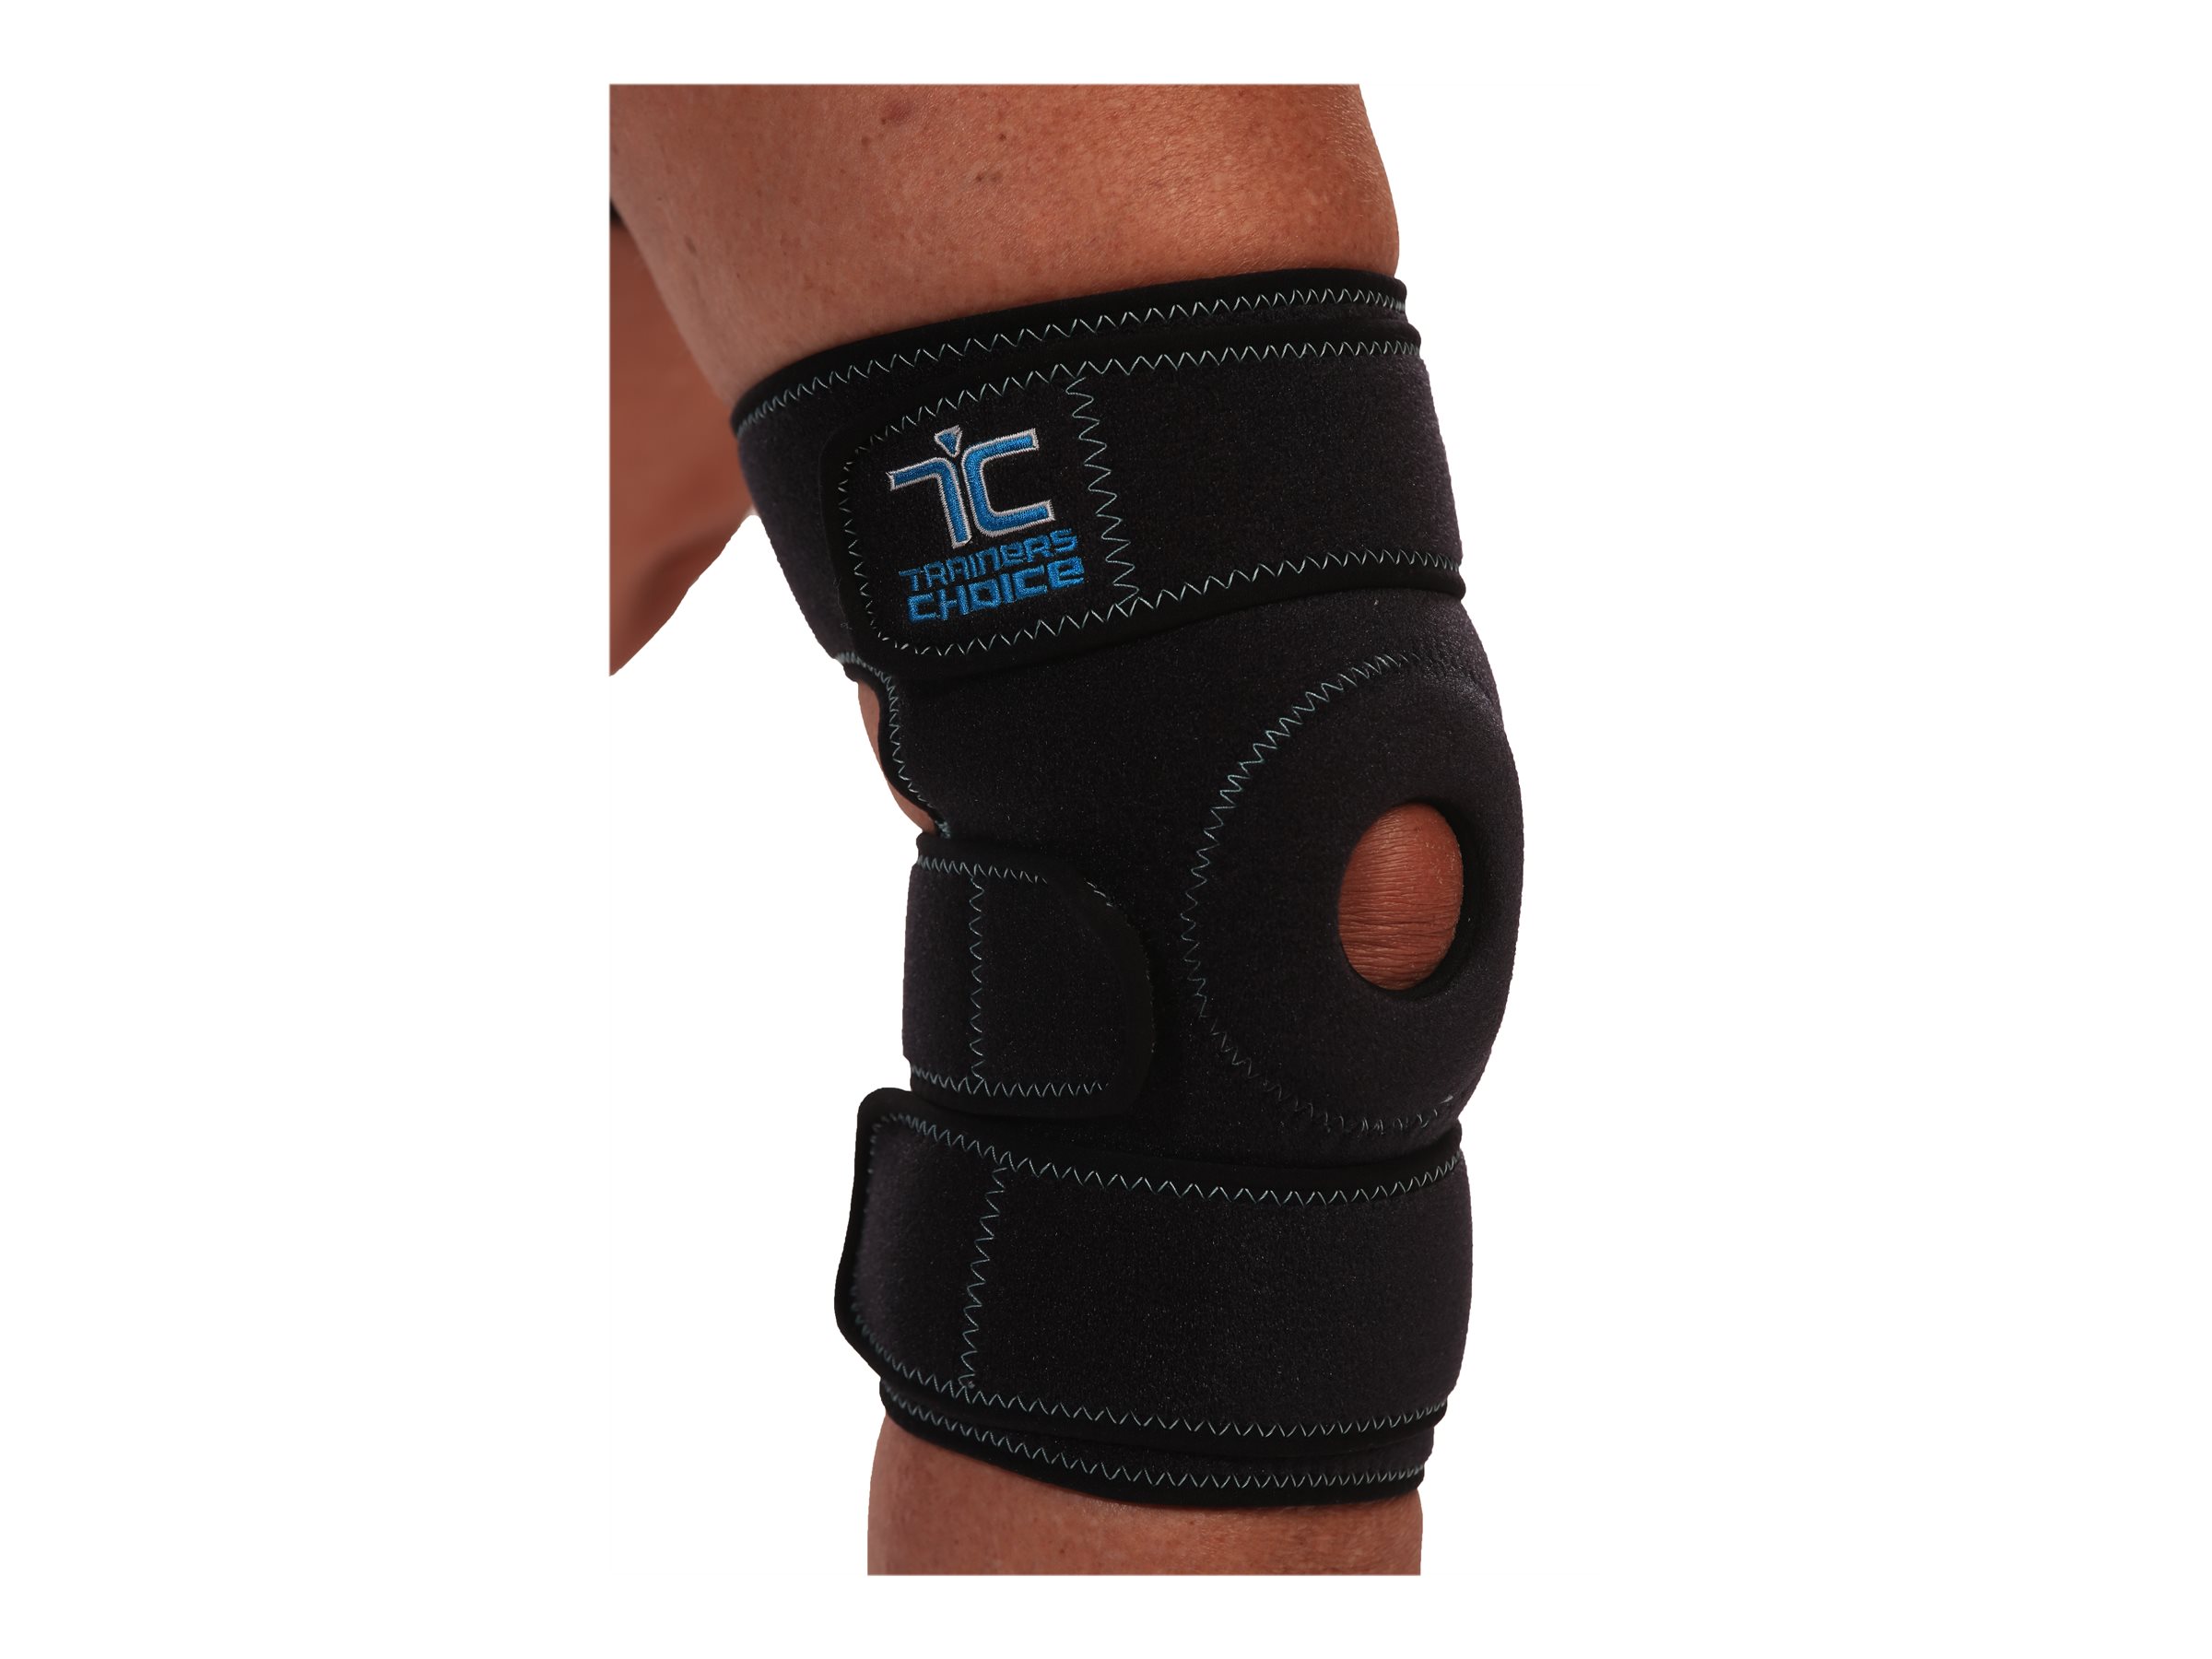 Trainers Choice Knee Compression Wrap - Black - One Size